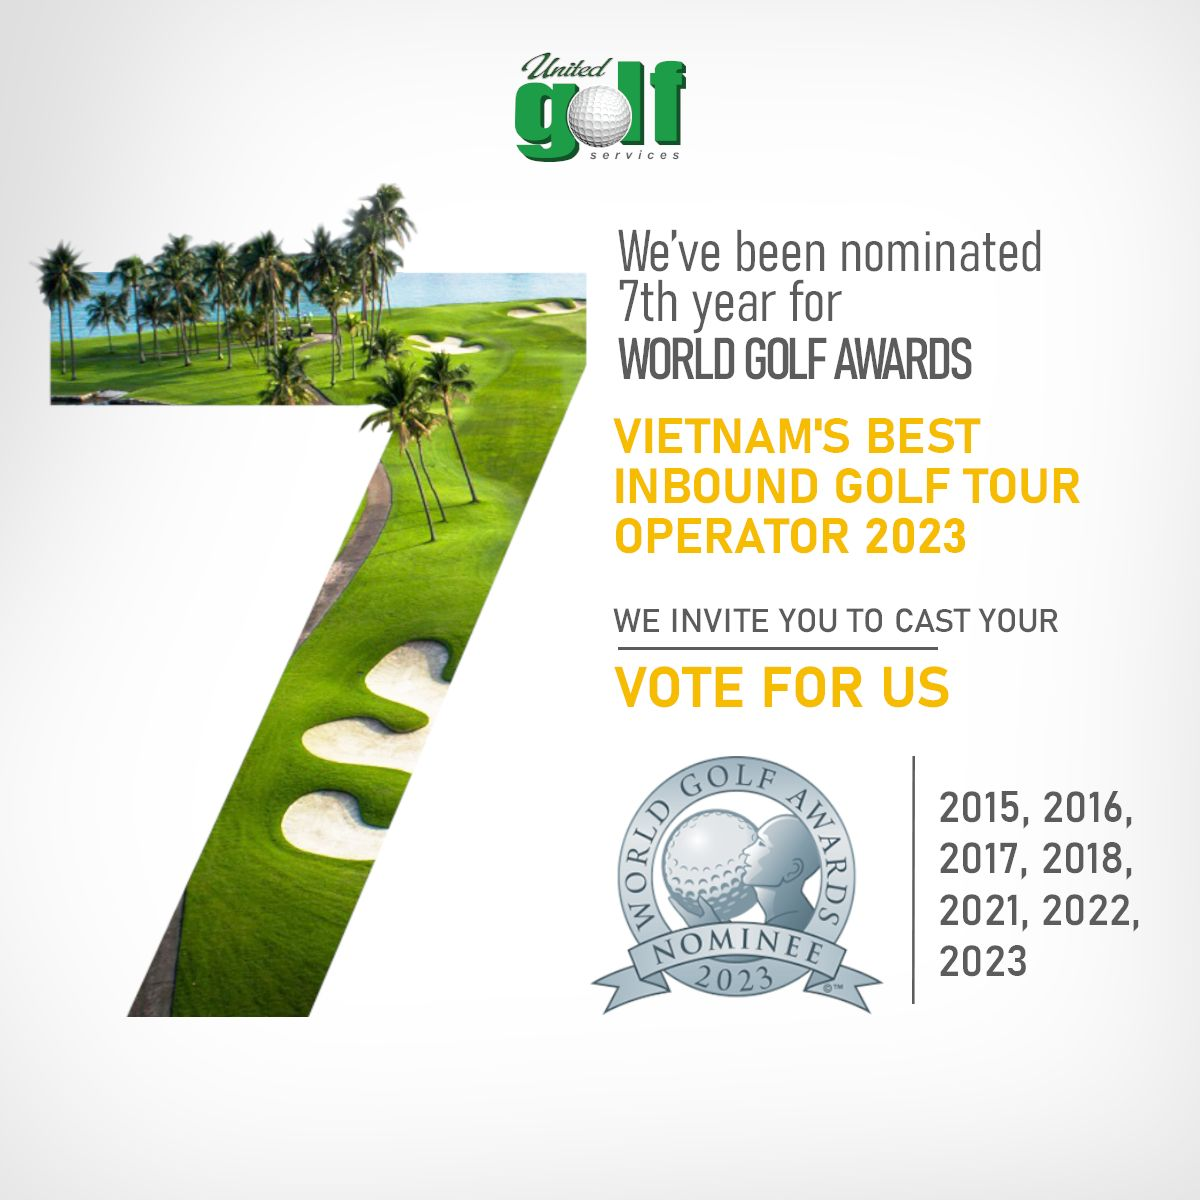 Unigolf Is Nominated For The 7th Time In The Category Of “Vietnam’s Best Inbound Golf Tour Operator 2023